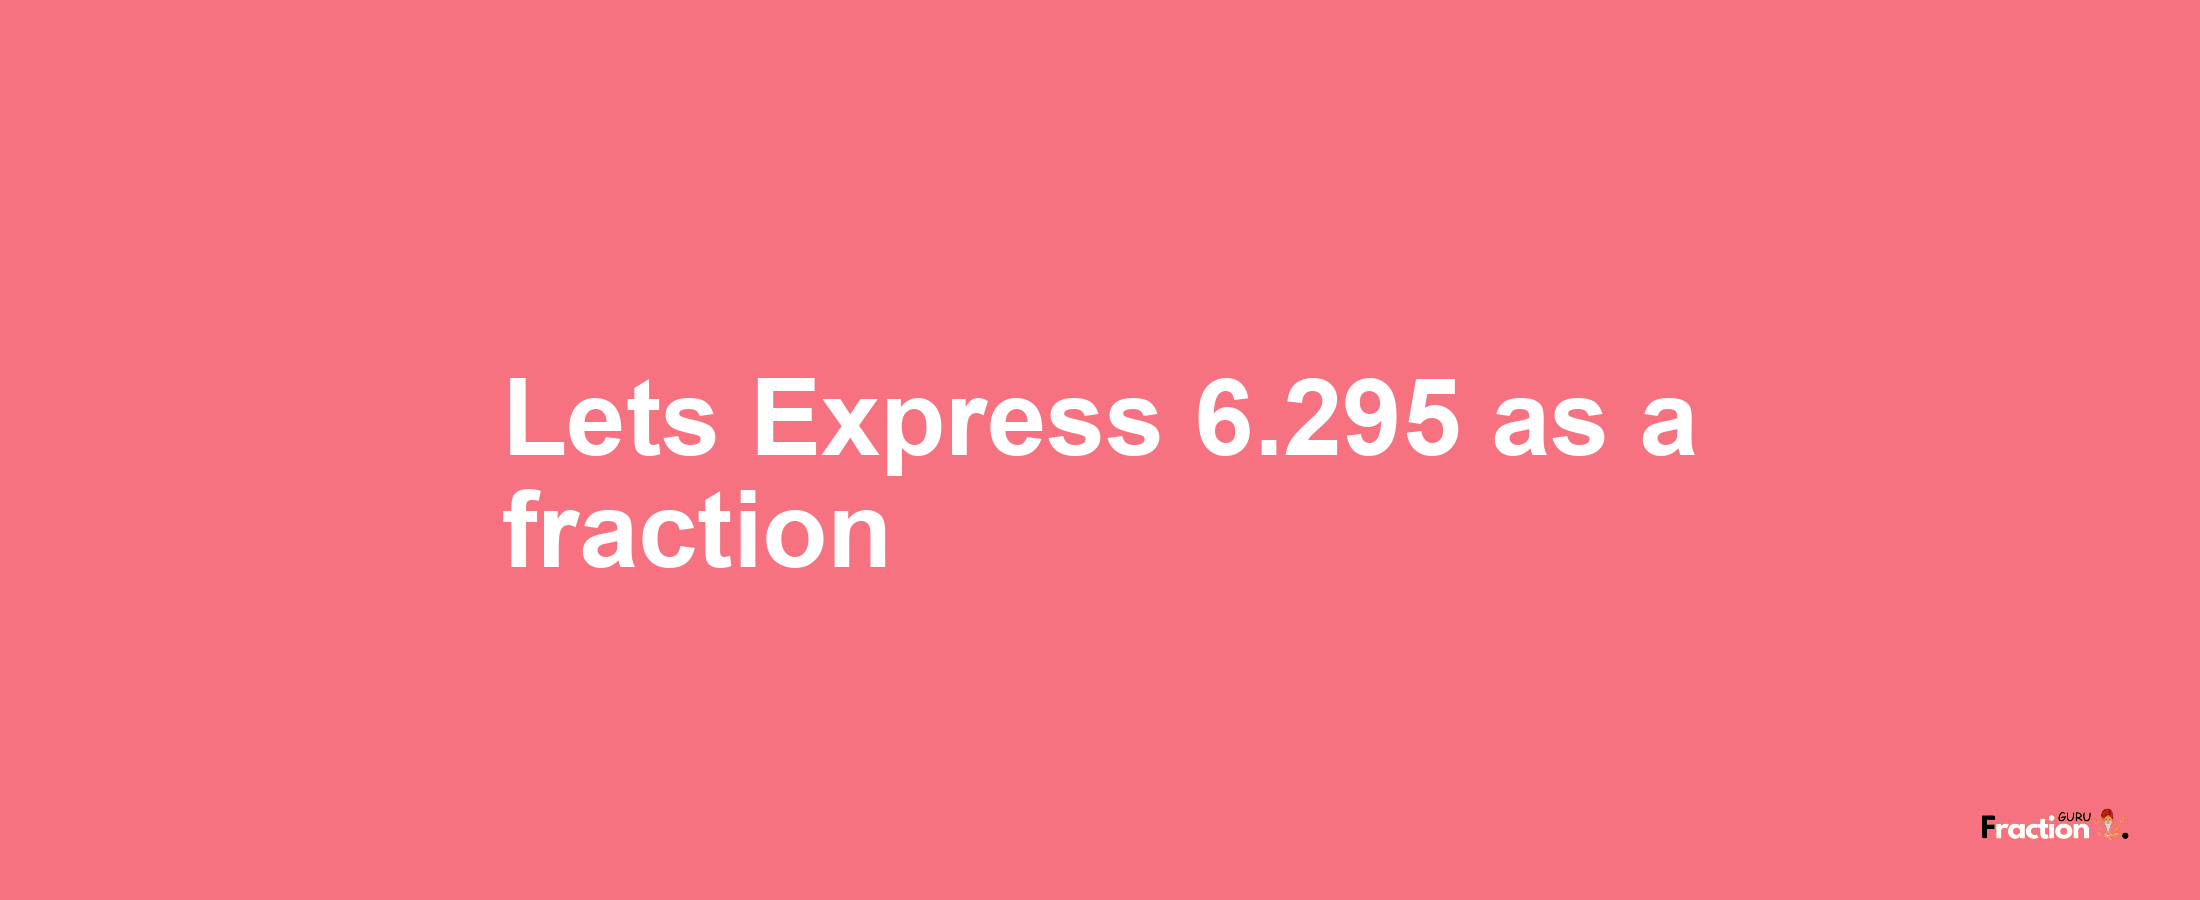 Lets Express 6.295 as afraction